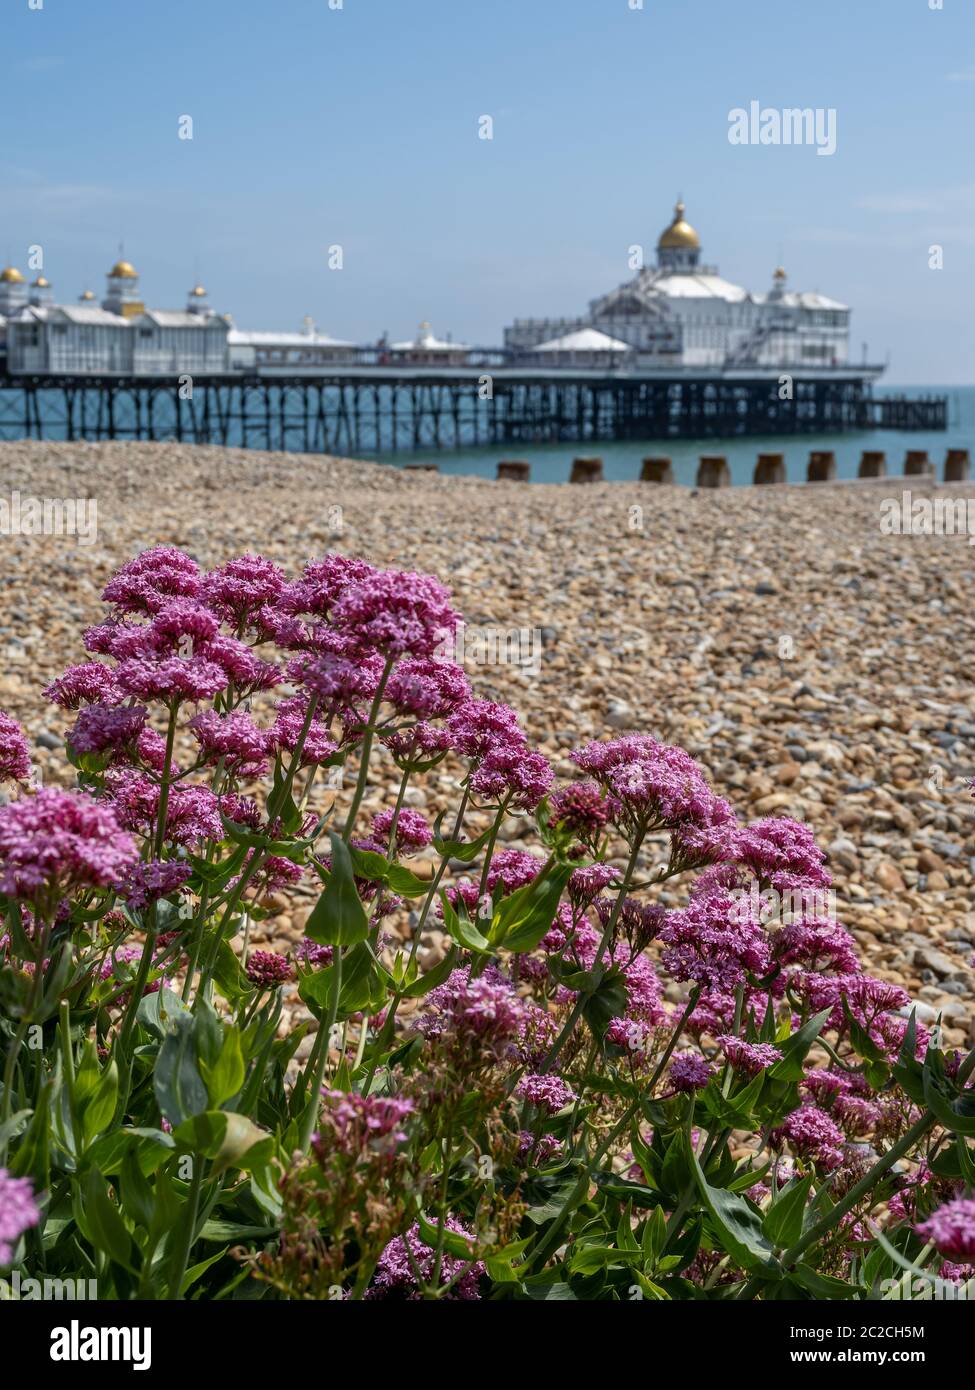 Wild Red Valerian flowers blooming on the beach at Eastboune in summertime Stock Photo